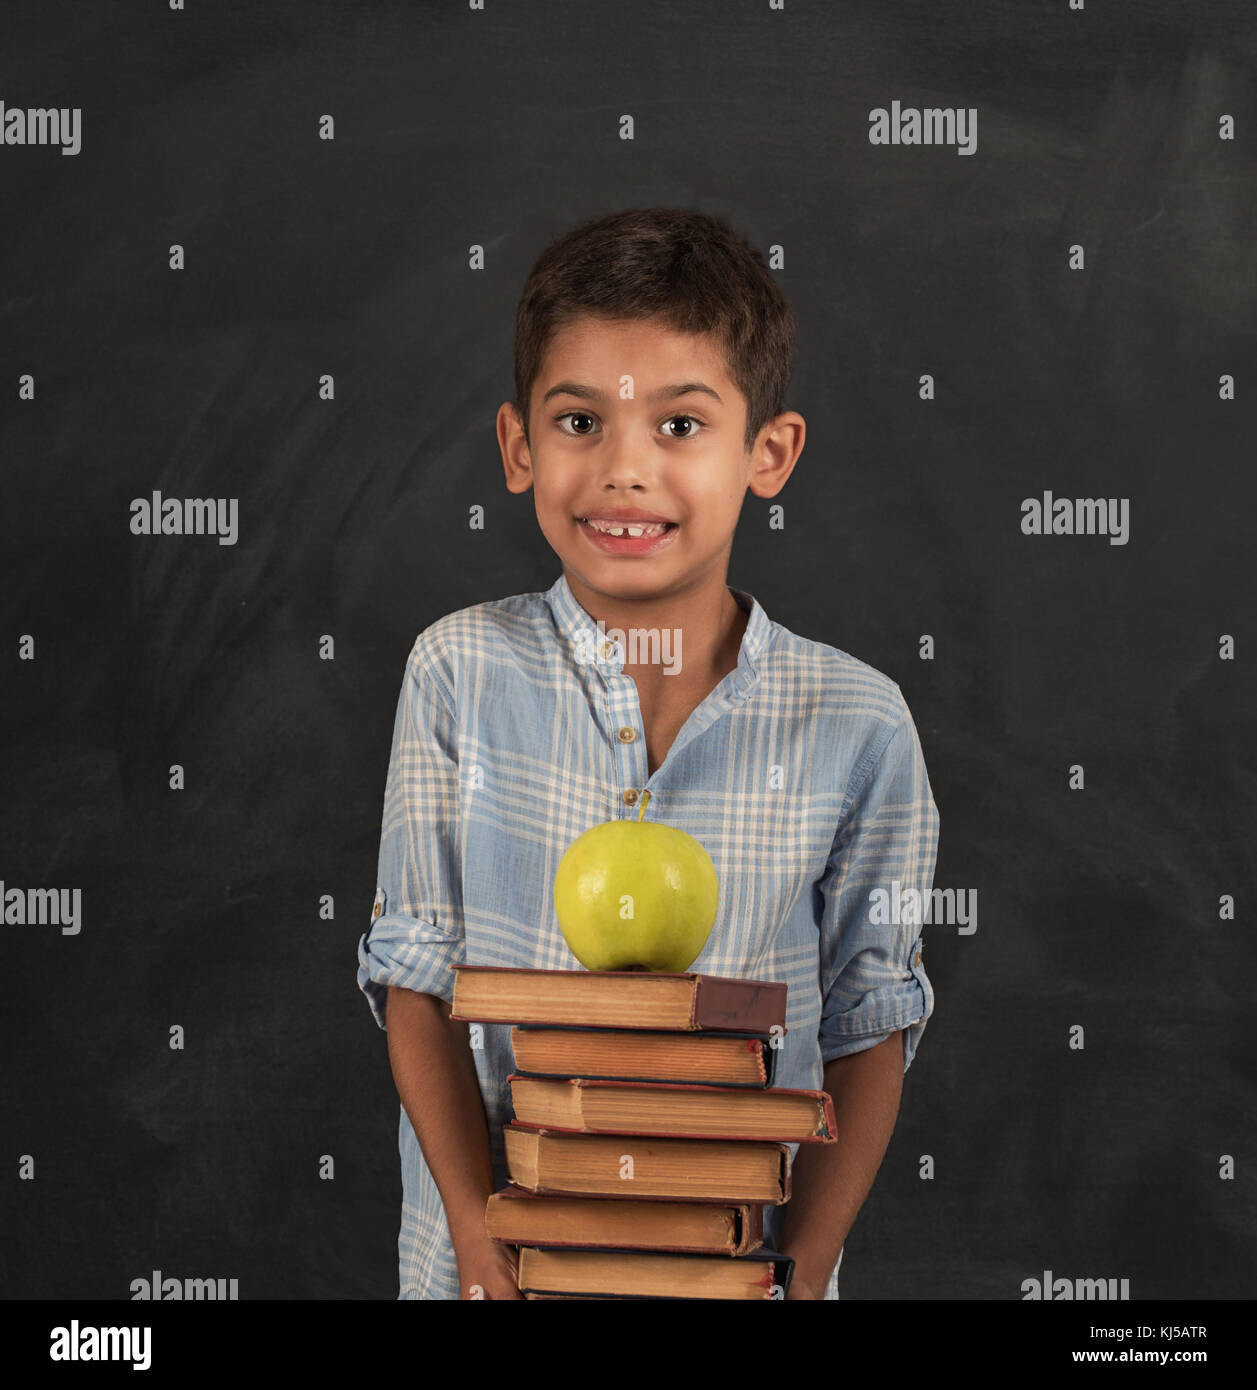 Closeup of little boy holding stack of books and apple. Happy schoolboy smiling and looking at camera. Stock Photo